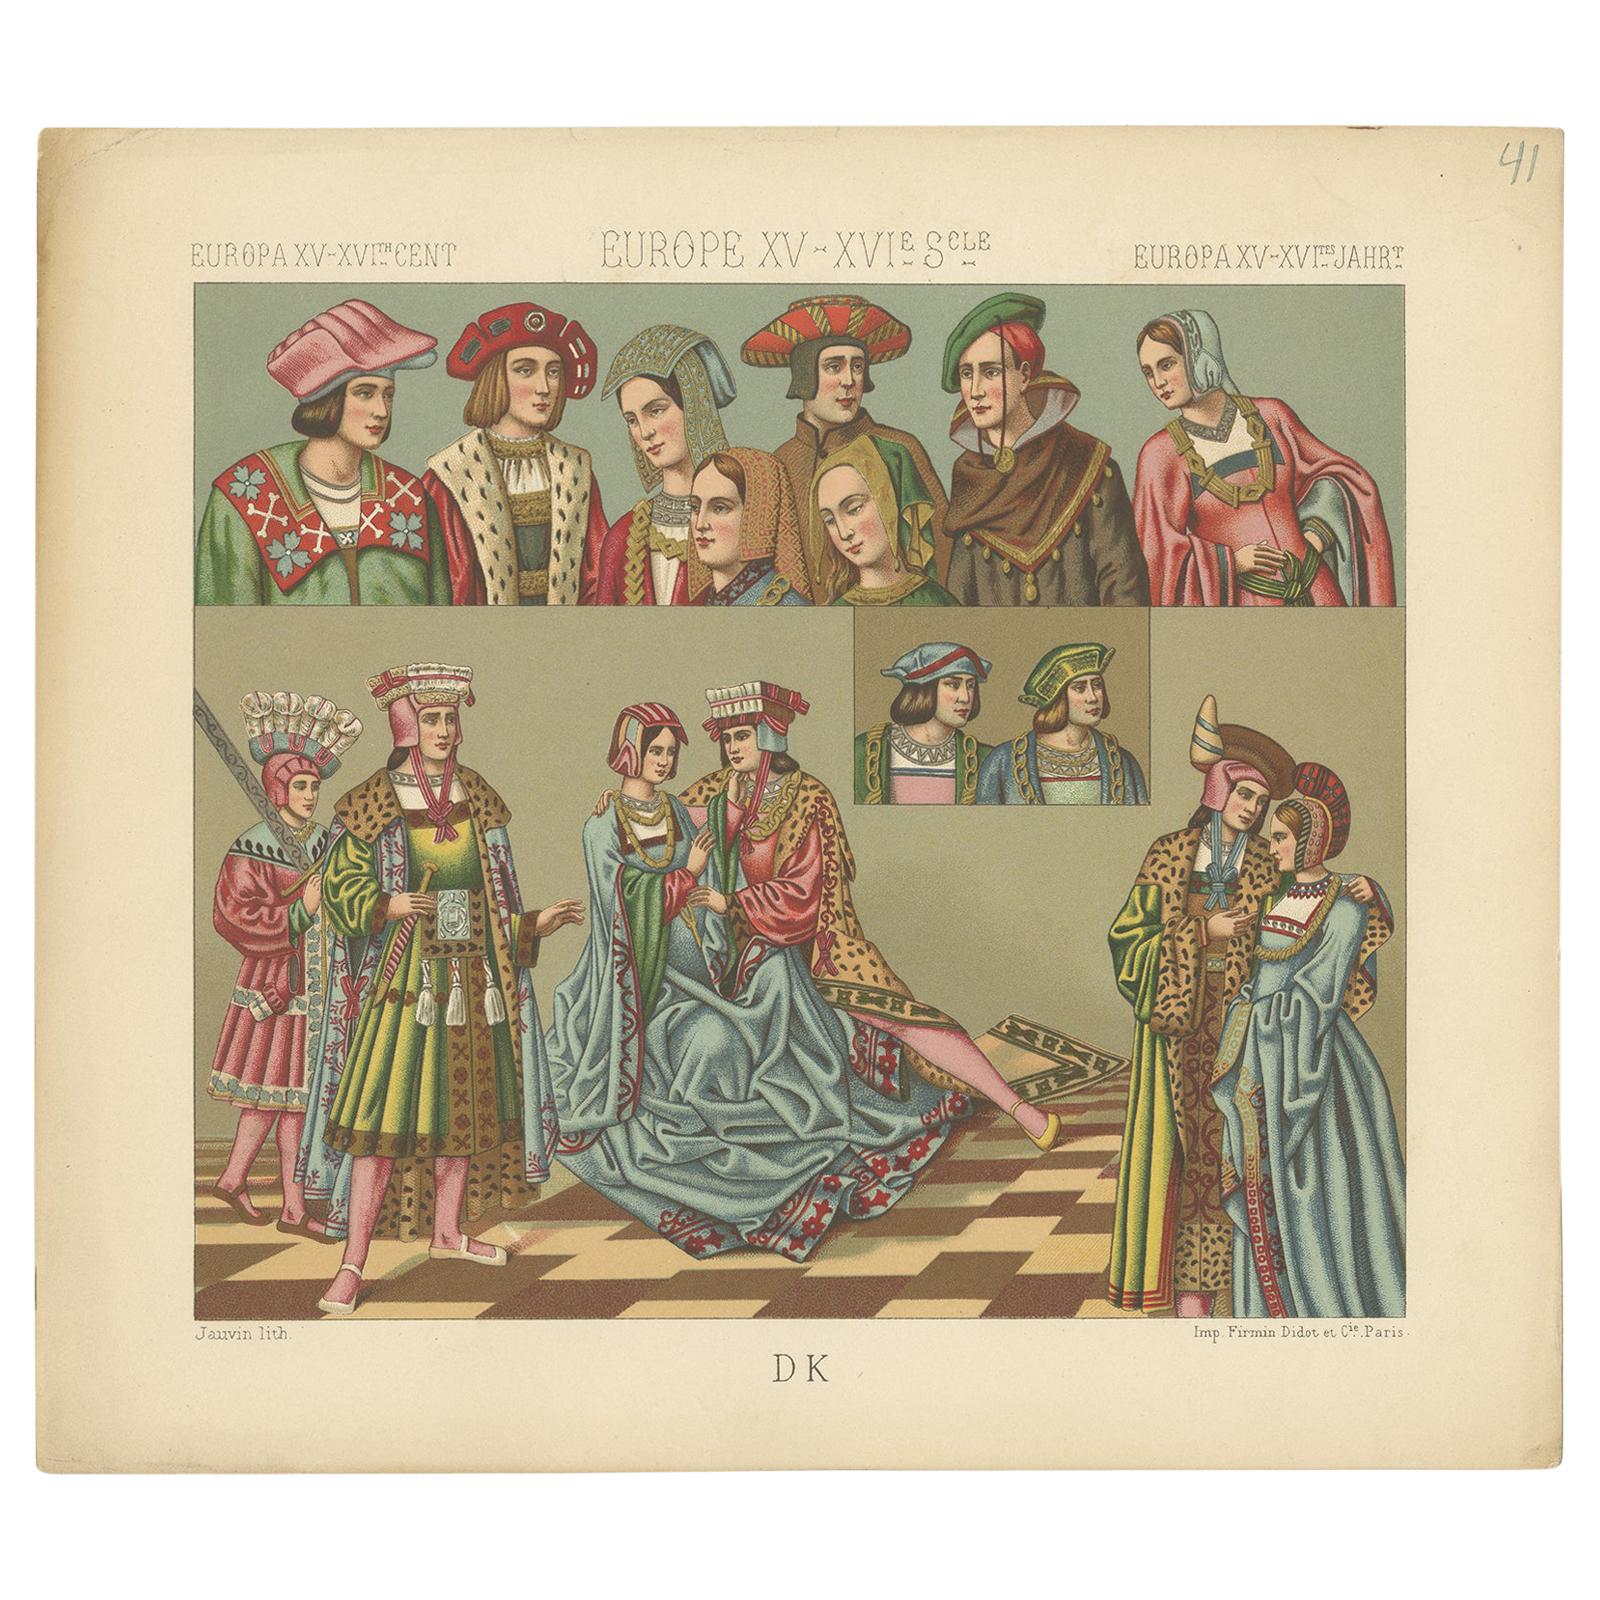 Pl 41 Antique Print of European 15th-16th Century Costumes by Racinet